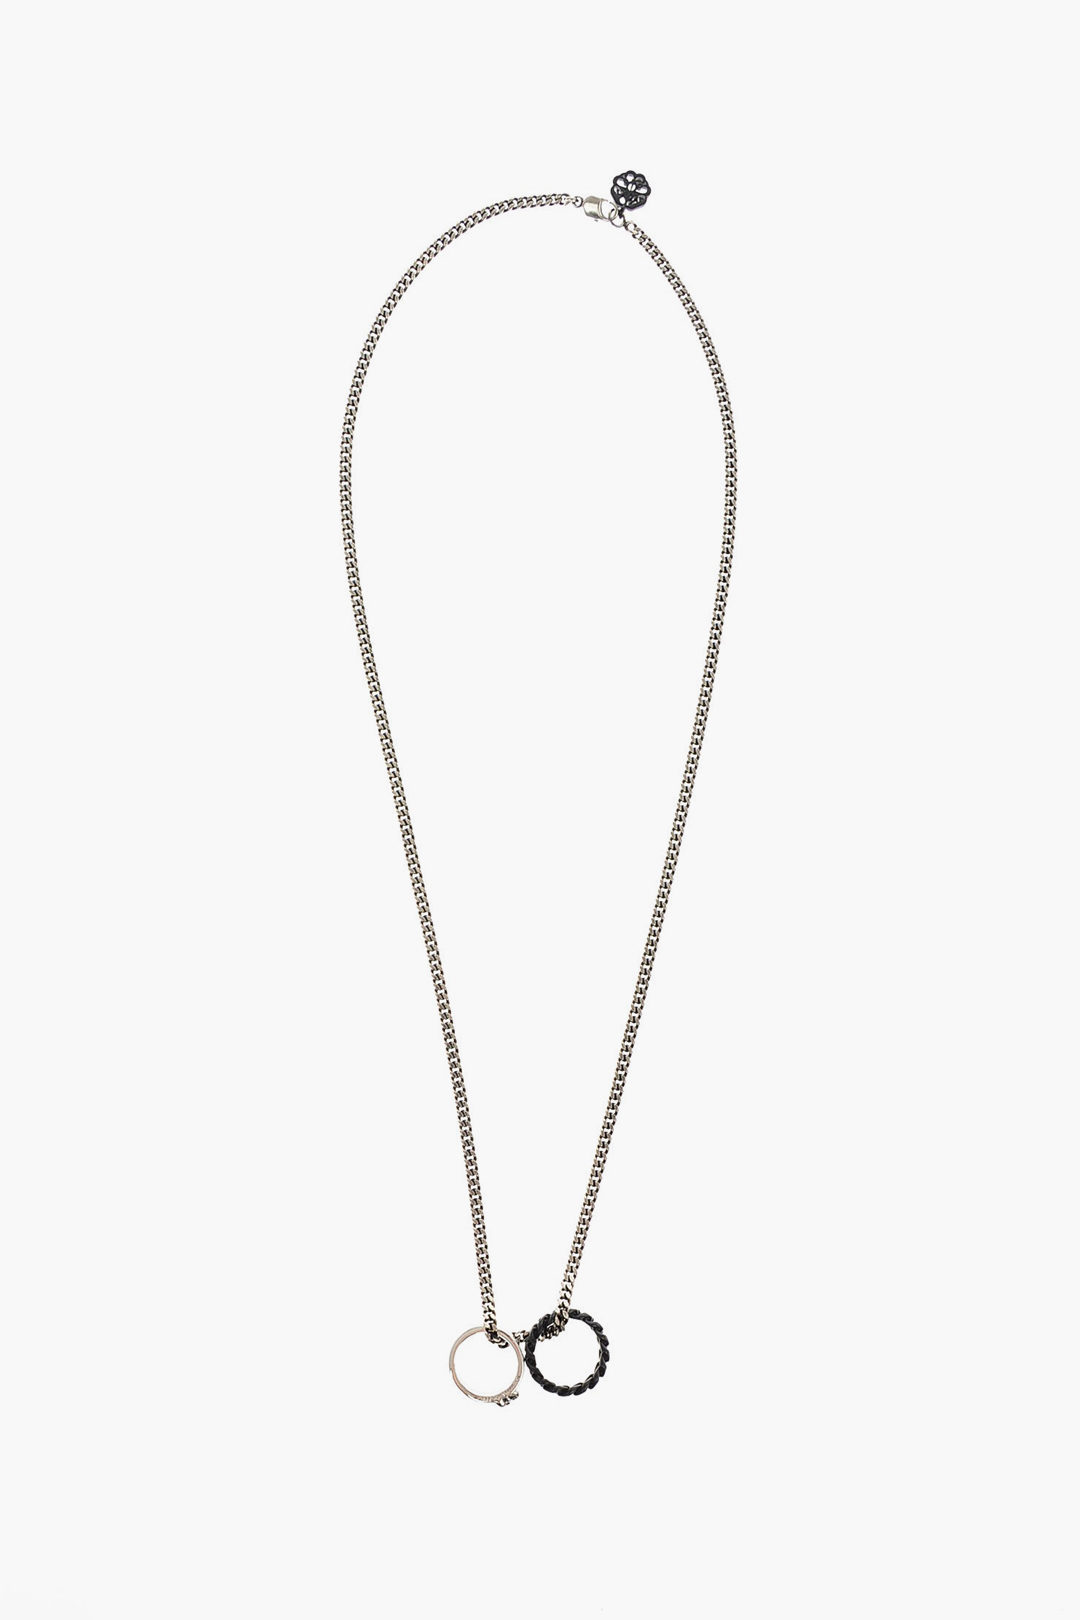 Alexander McQueen brass double ring necklace men - Glamood Outlet